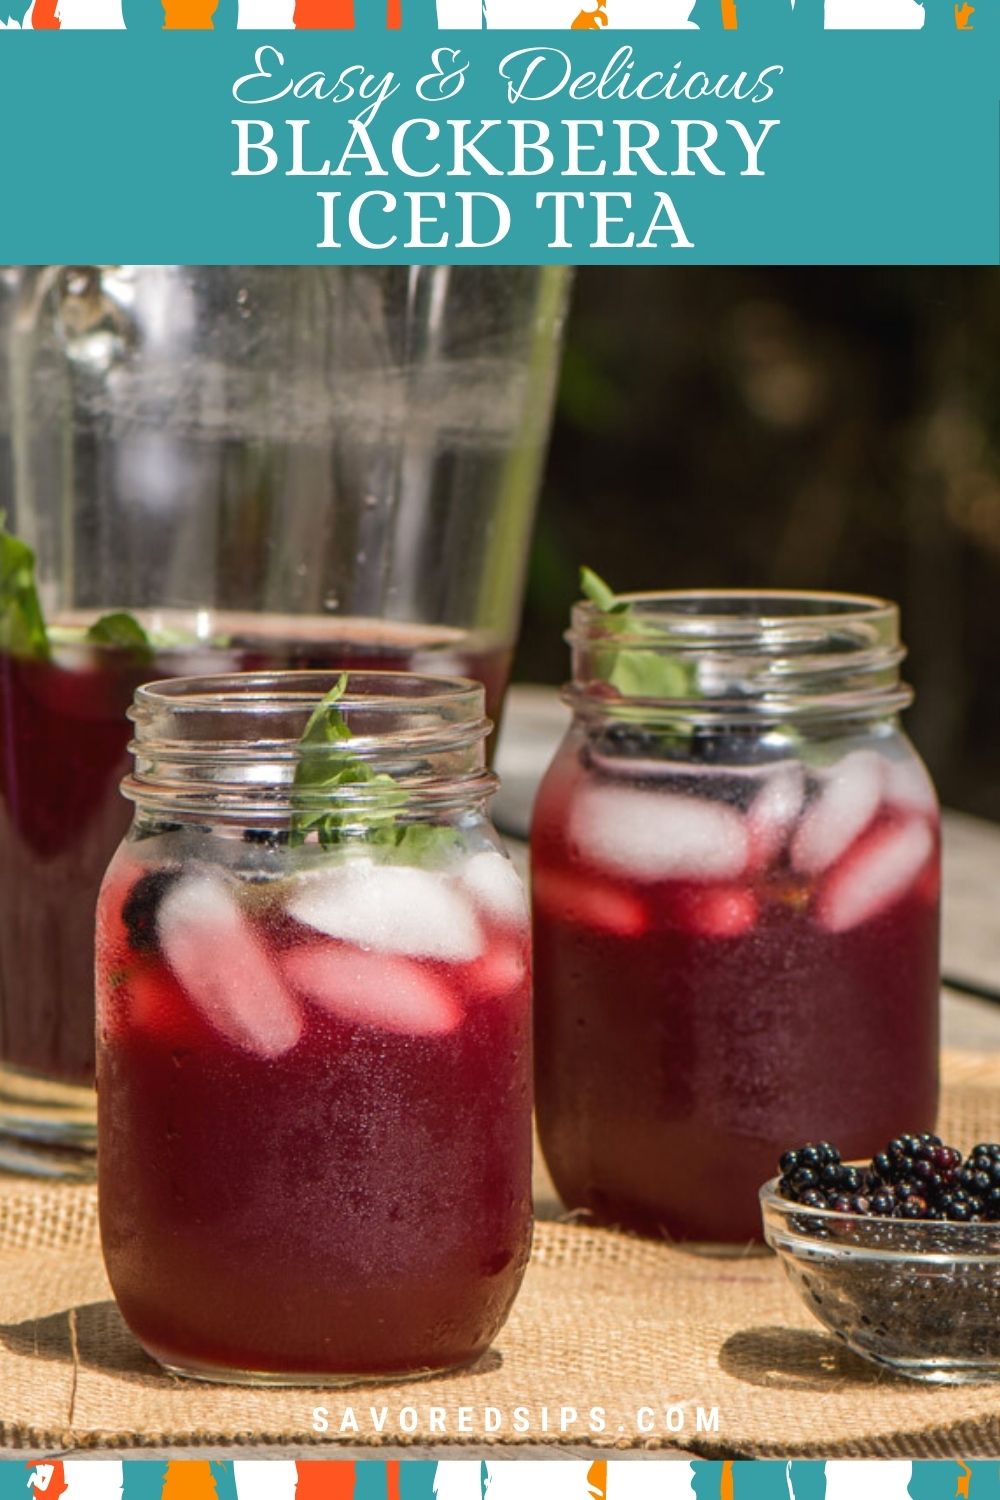 Easy & Delicious Blackberry Iced Tea - Savored Sips